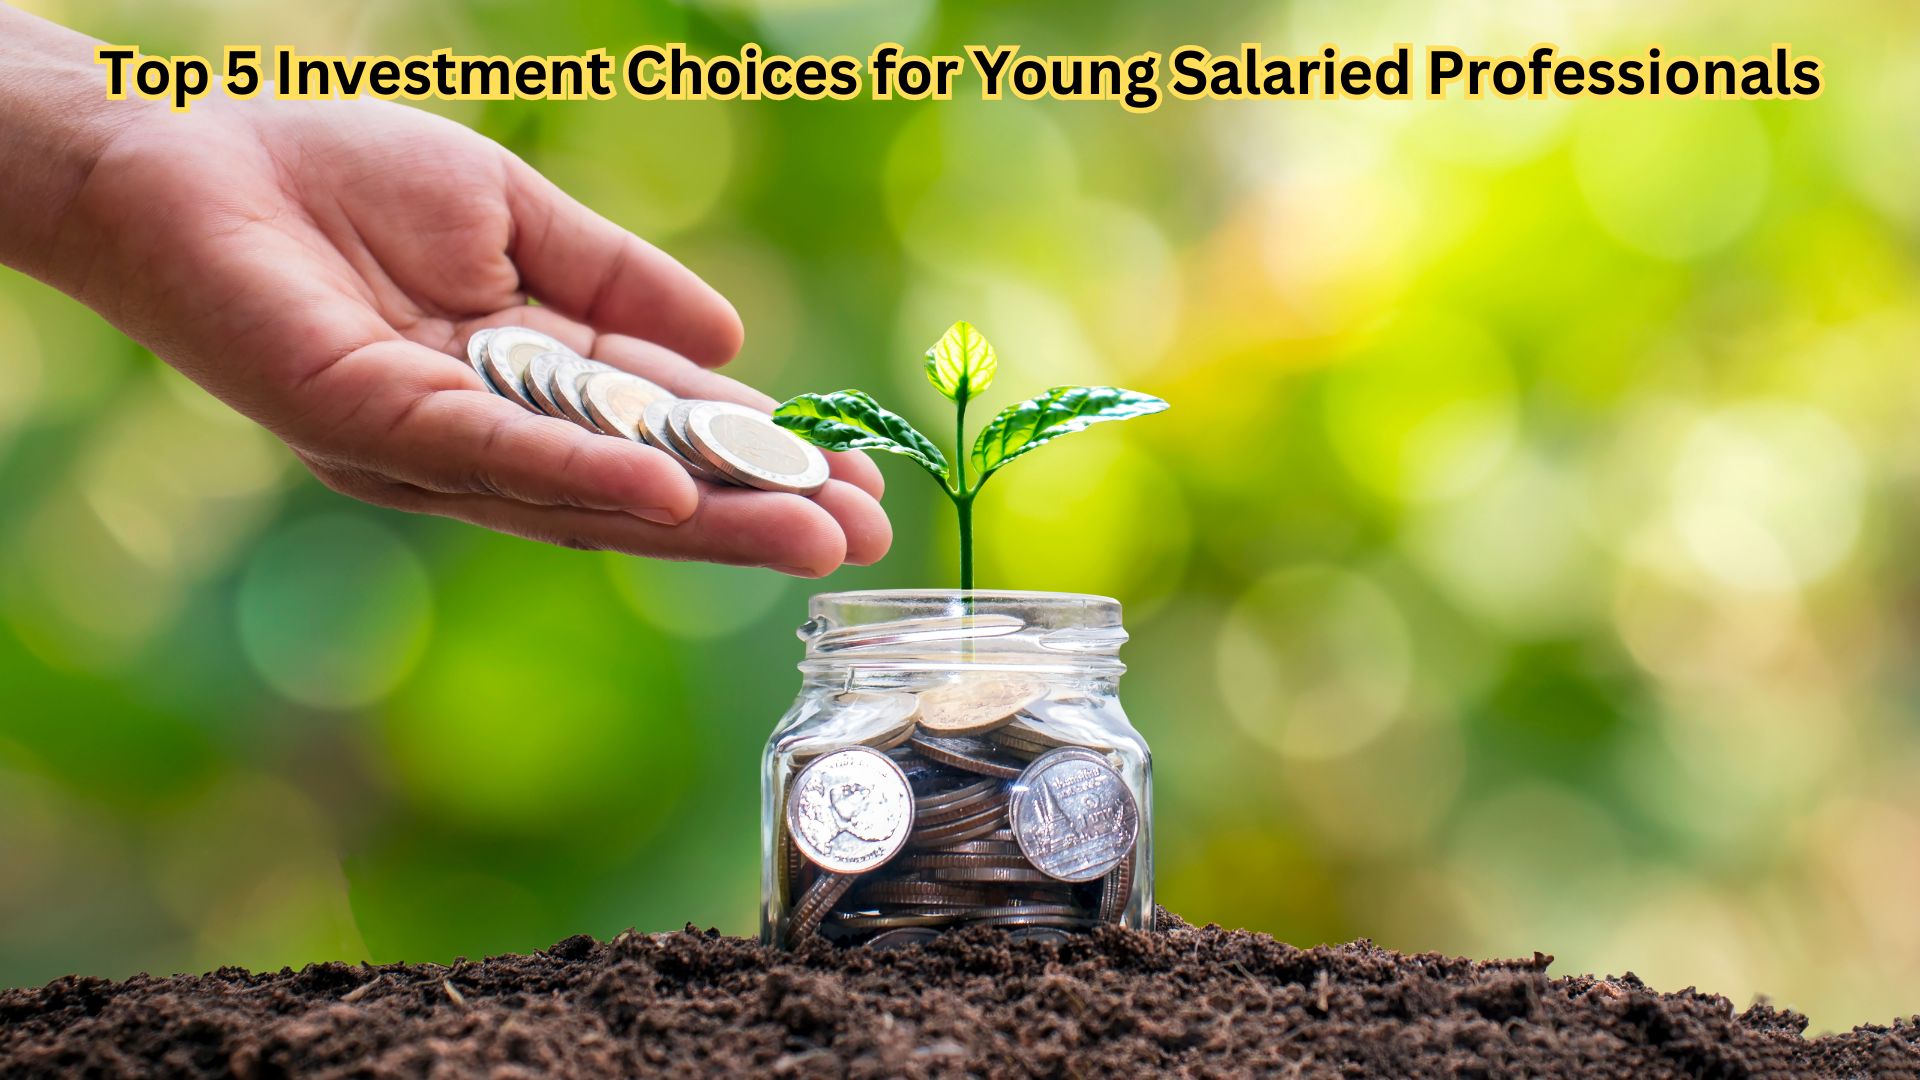 Top 5 Investment Choices for Young Salaried Professionals